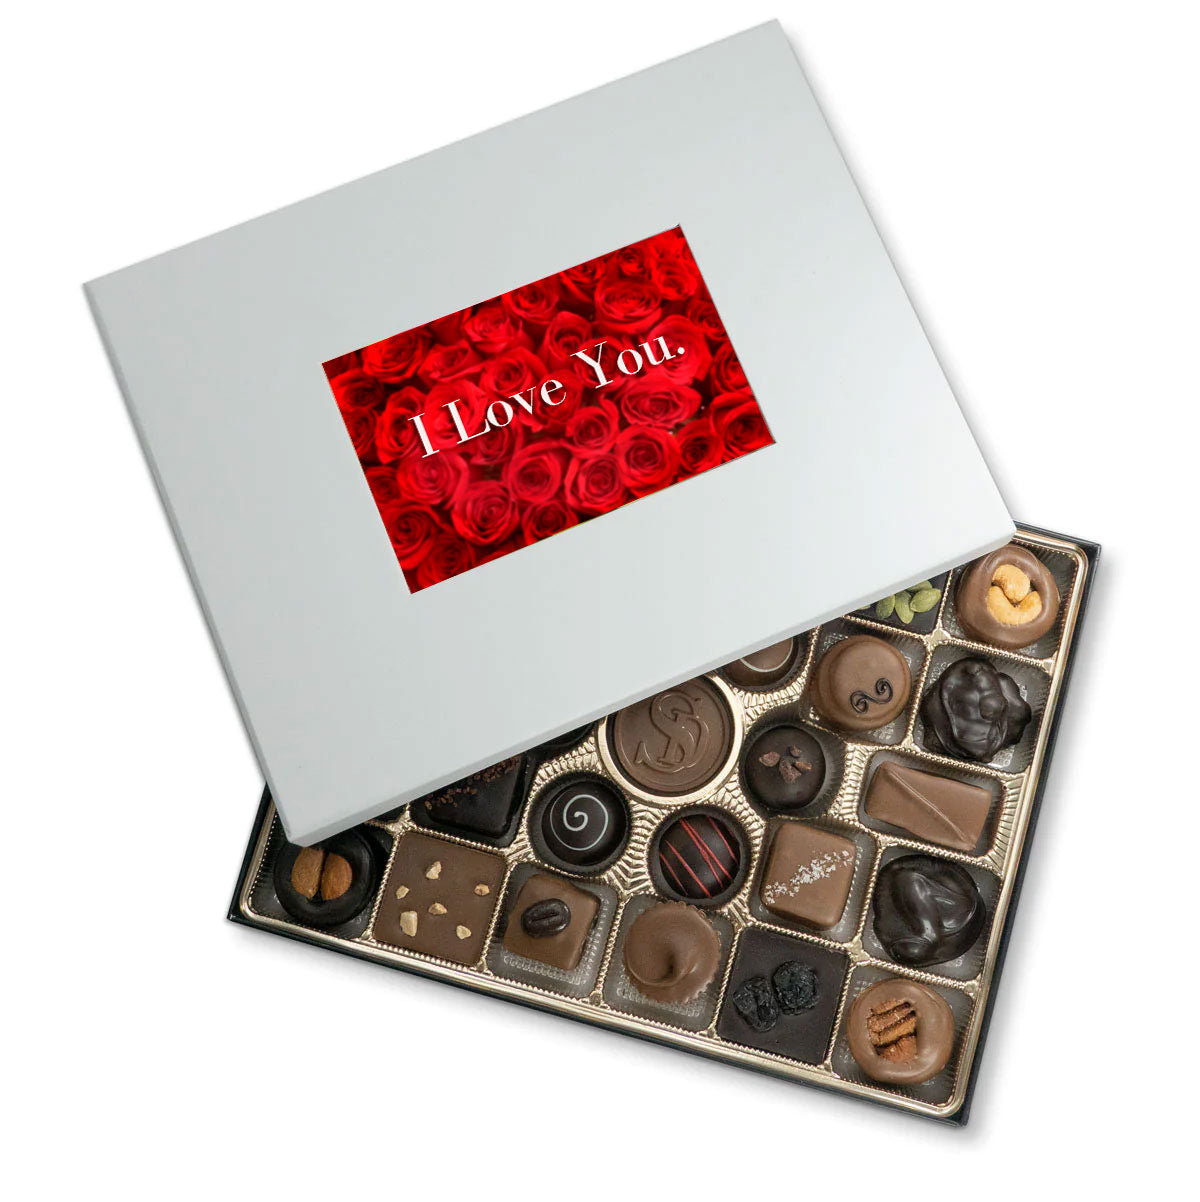 Lasting Impressions - Personalized Gourmet Chocolate Assortment